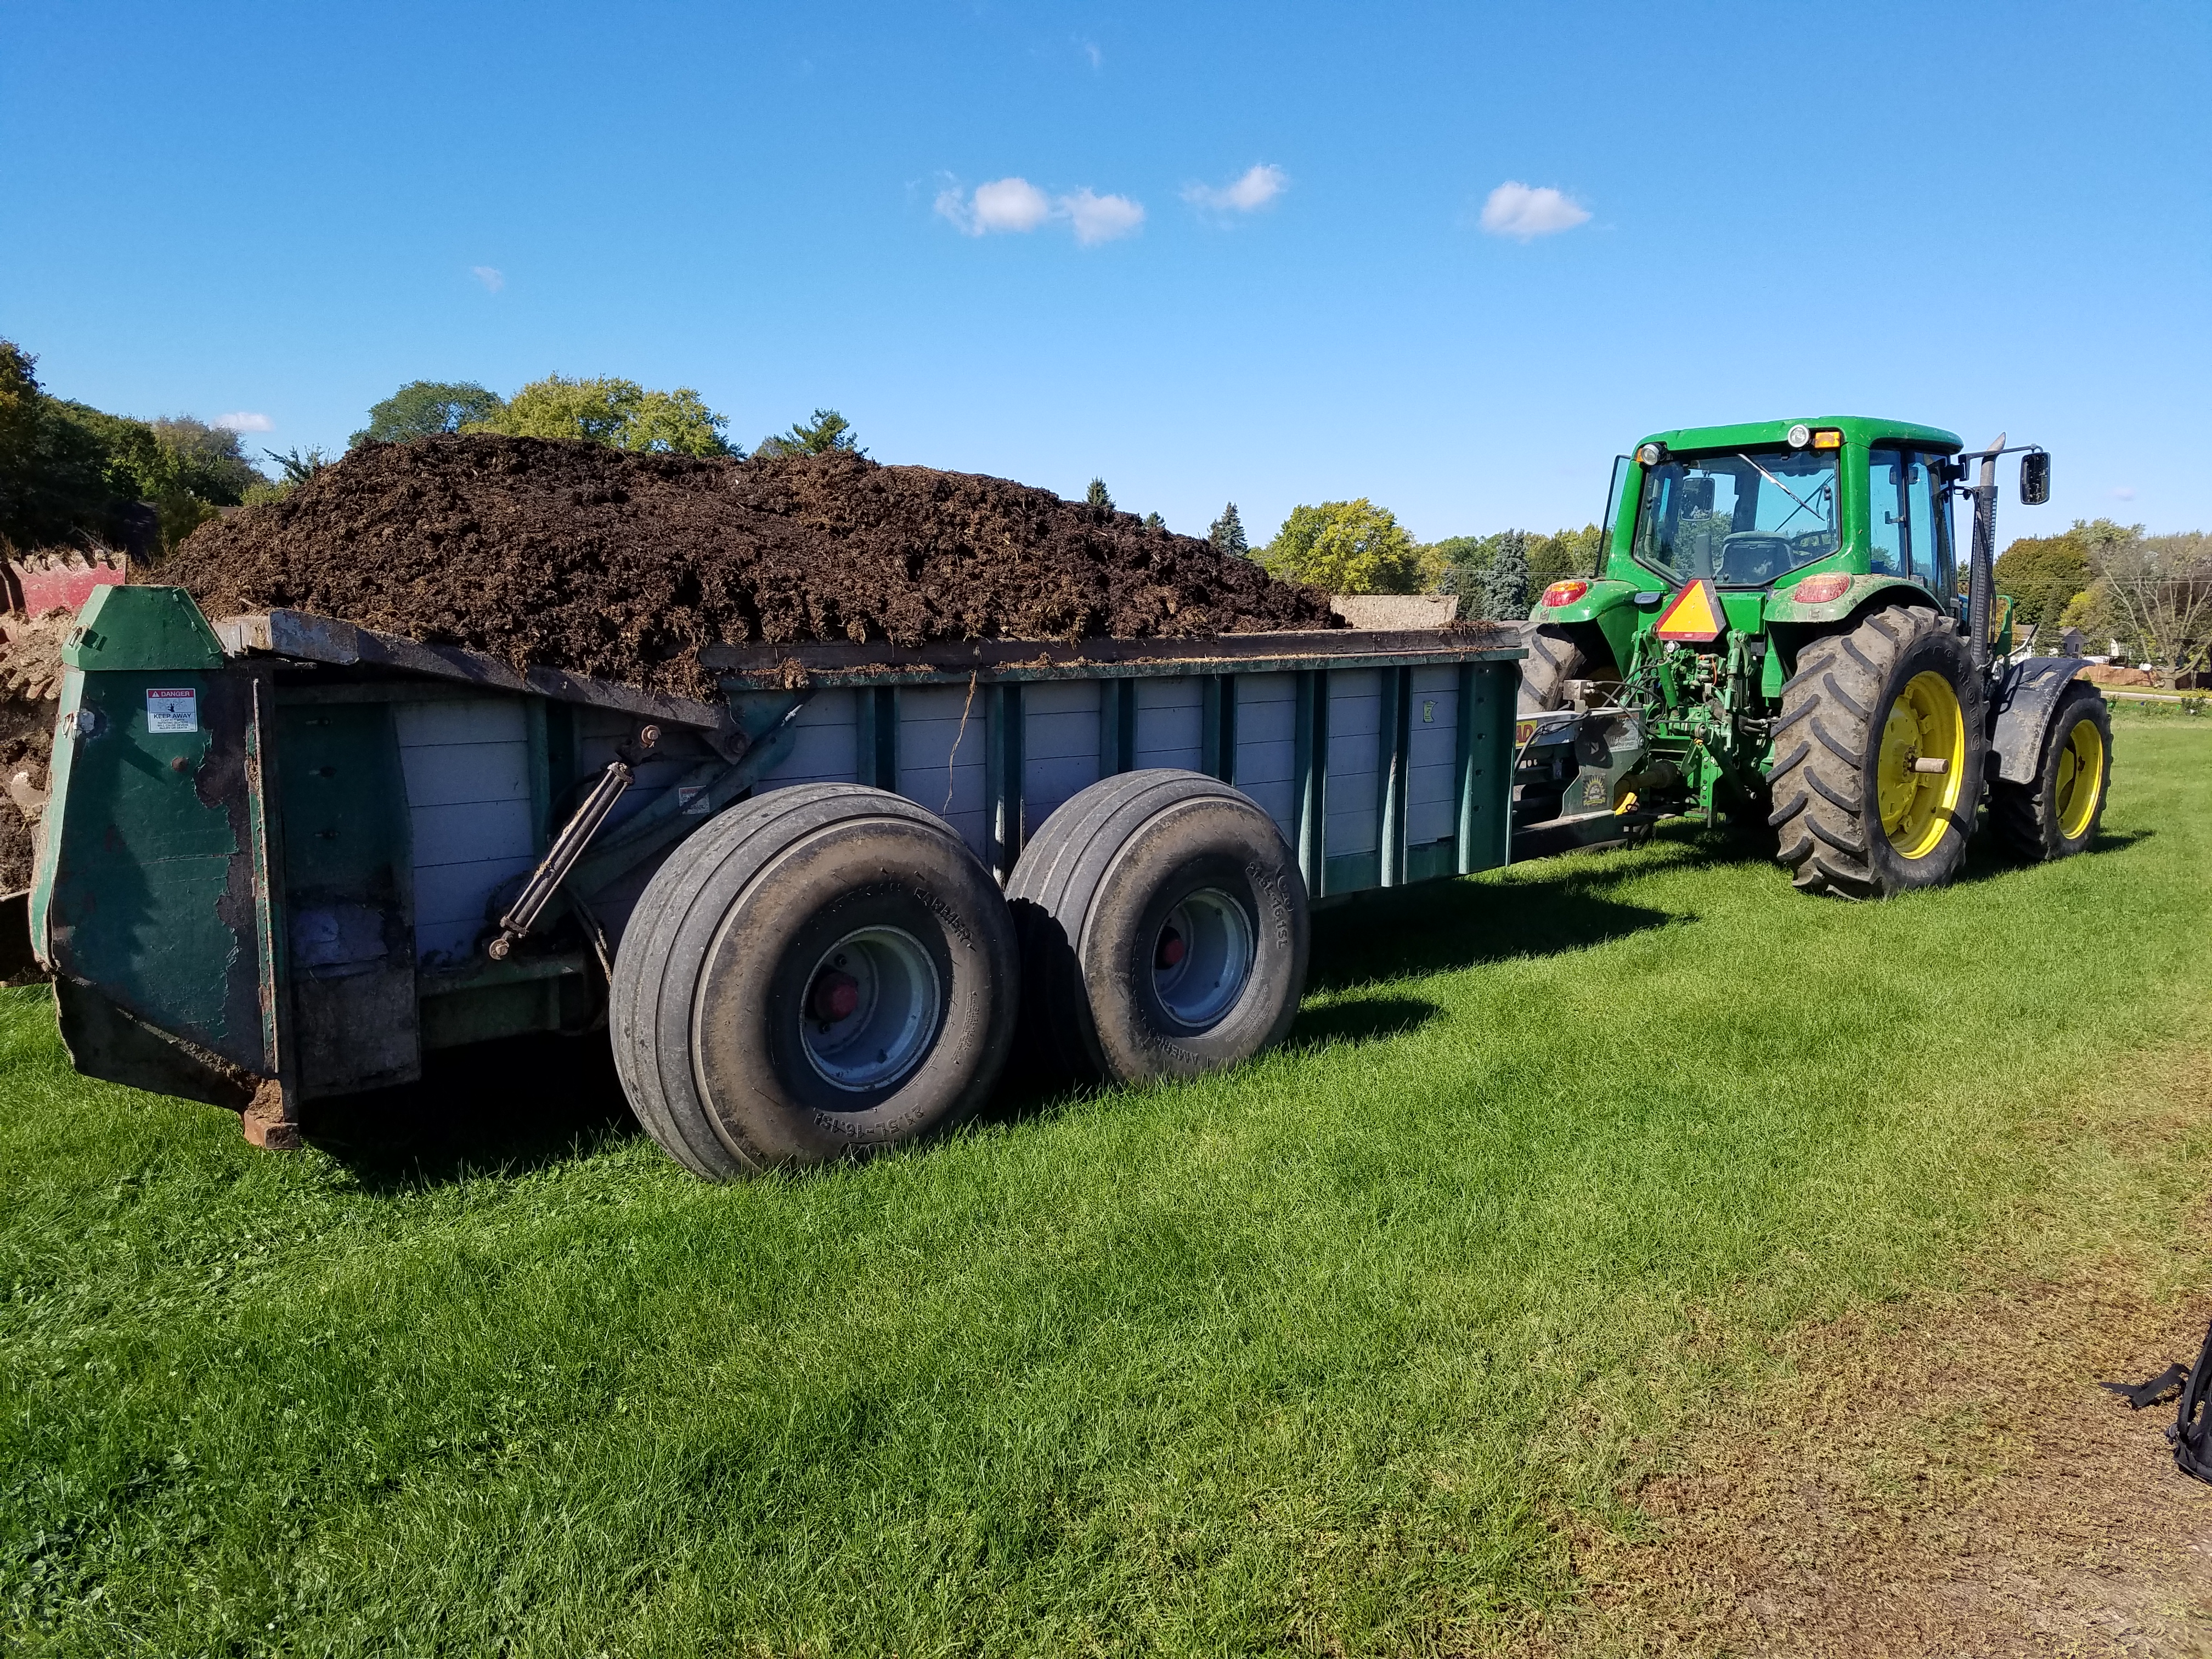 Composted solids in trailer